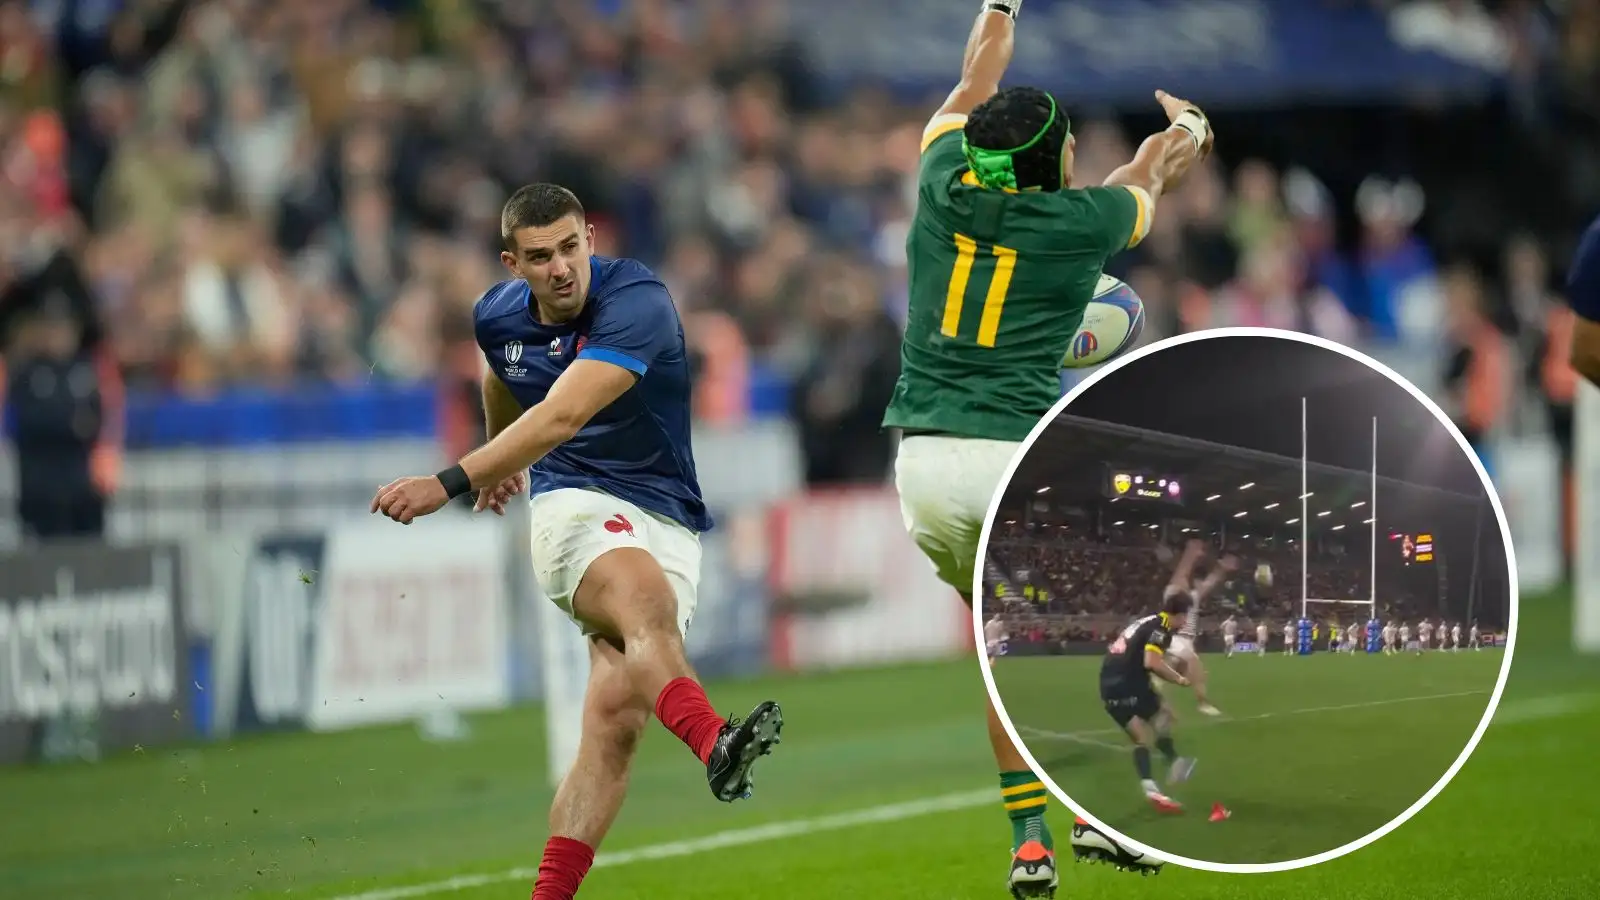 Thomas Ramos has his try conversion kick charged down by South Africa's Cheslin Kolbe during the Rugby World Cup quarterfinal match between France and South Africa and a screenshot of Damian Penaud's attempted charge down on Antoine Hastoy.